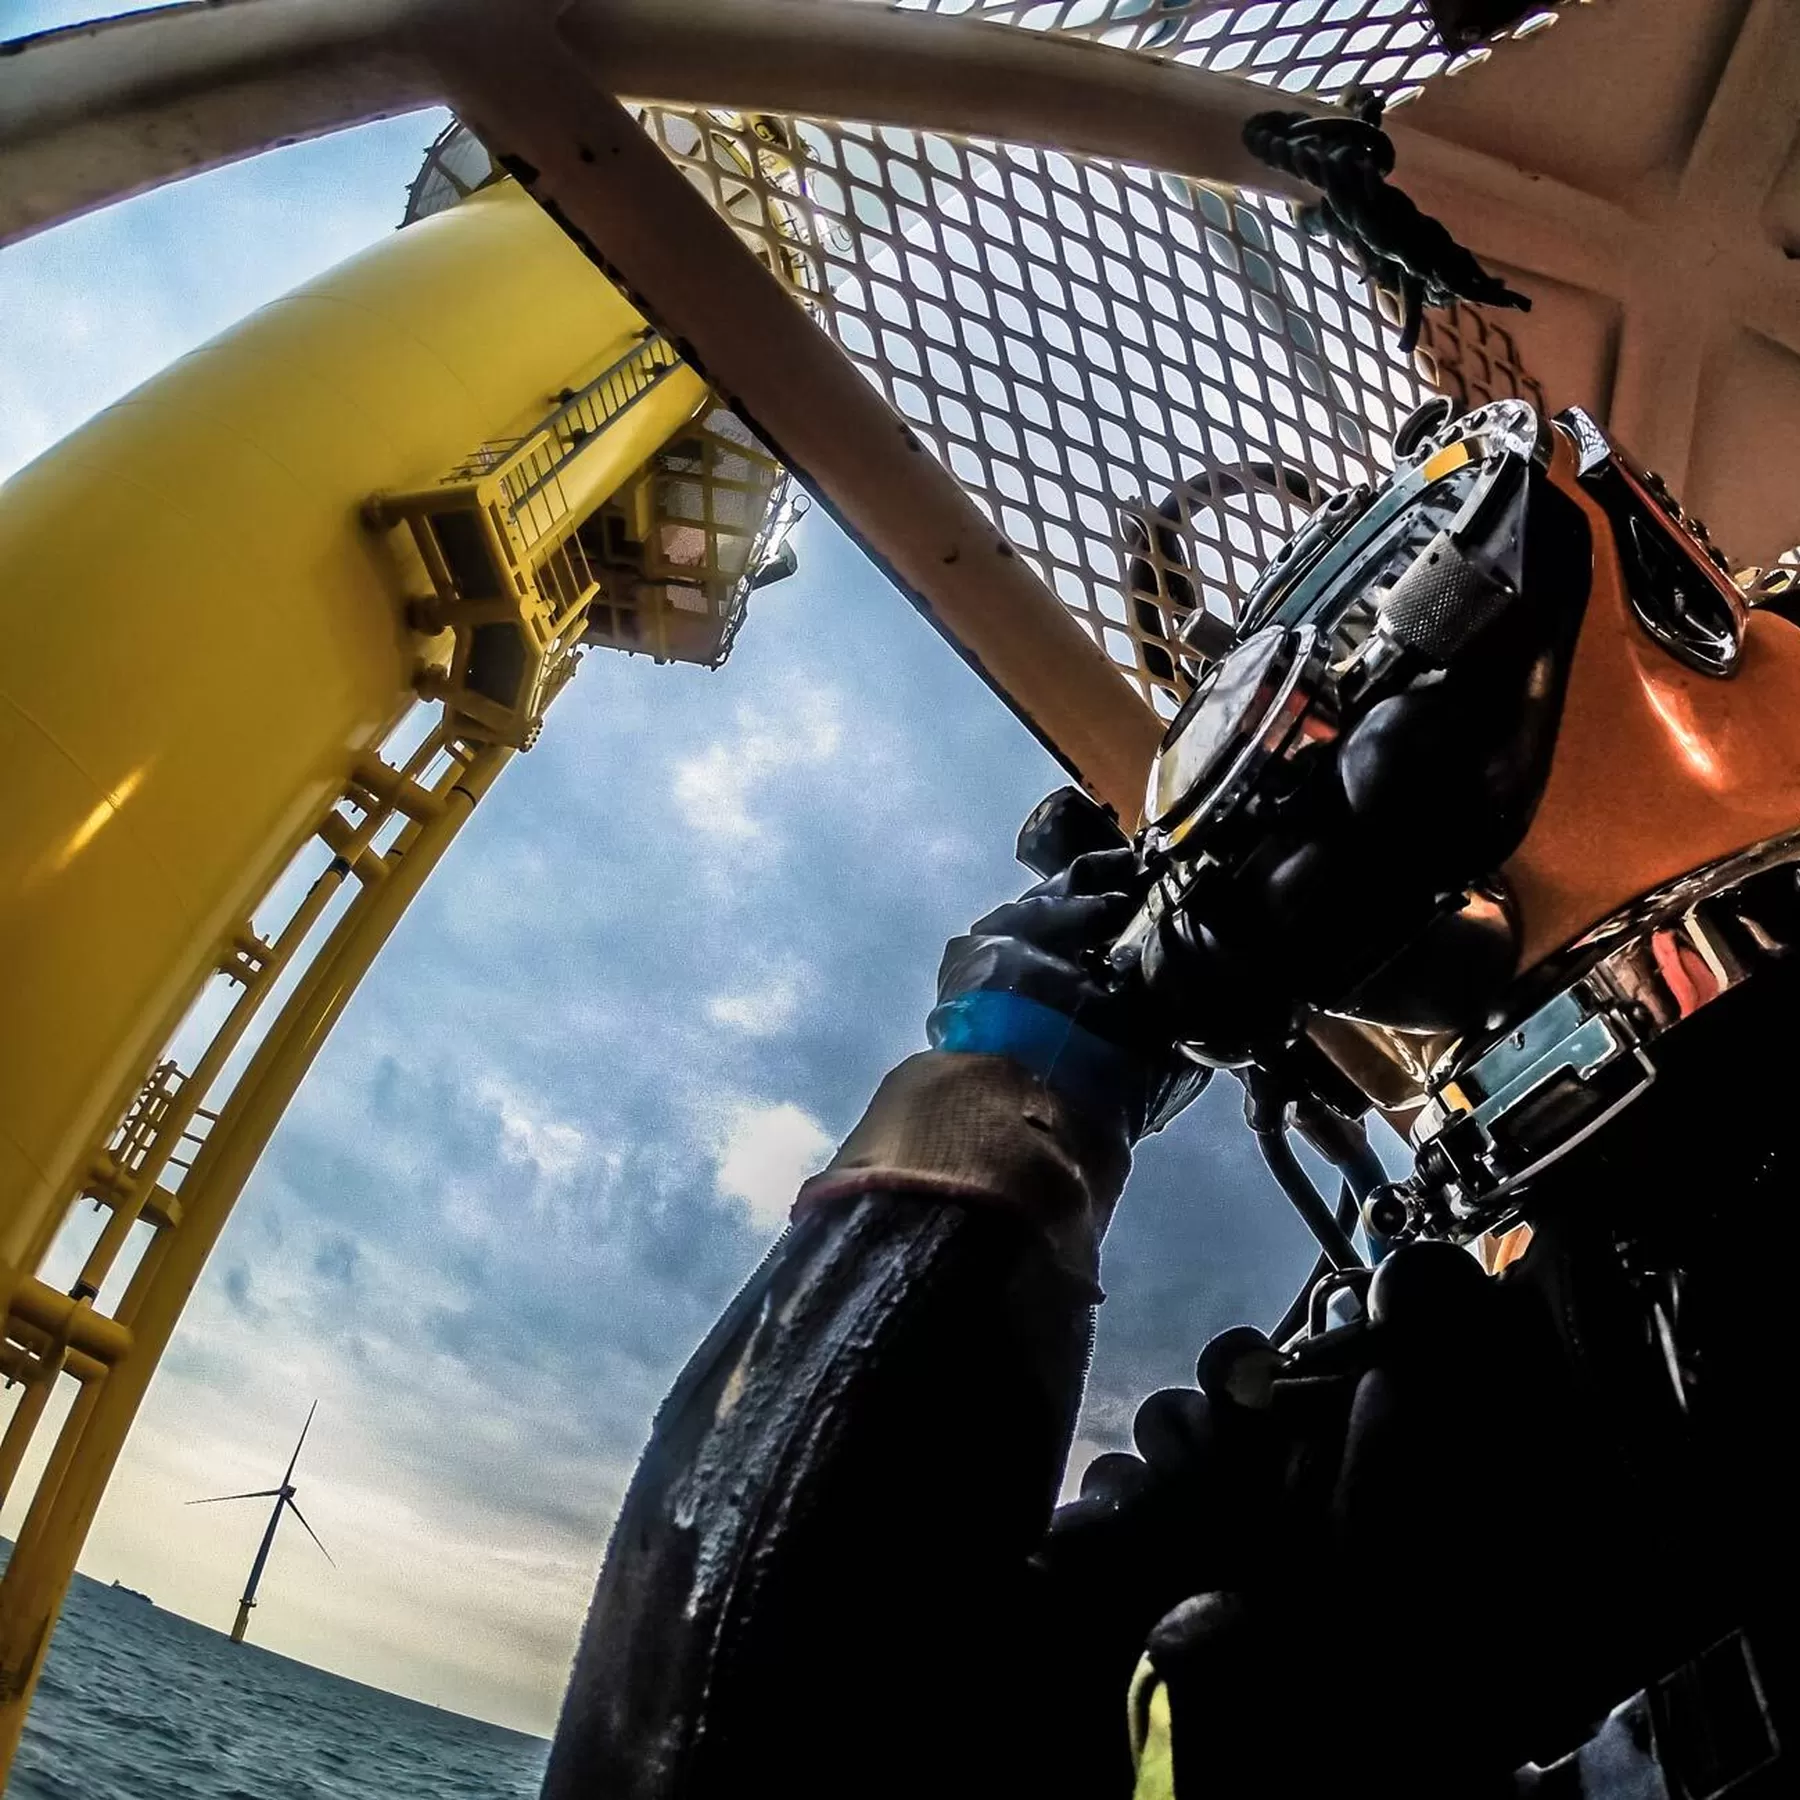 Netherlands-based Marine Coordination Services (MCS) has been acquired by OEG Energy Group, for an undisclosed sum, joining its Renewables division.